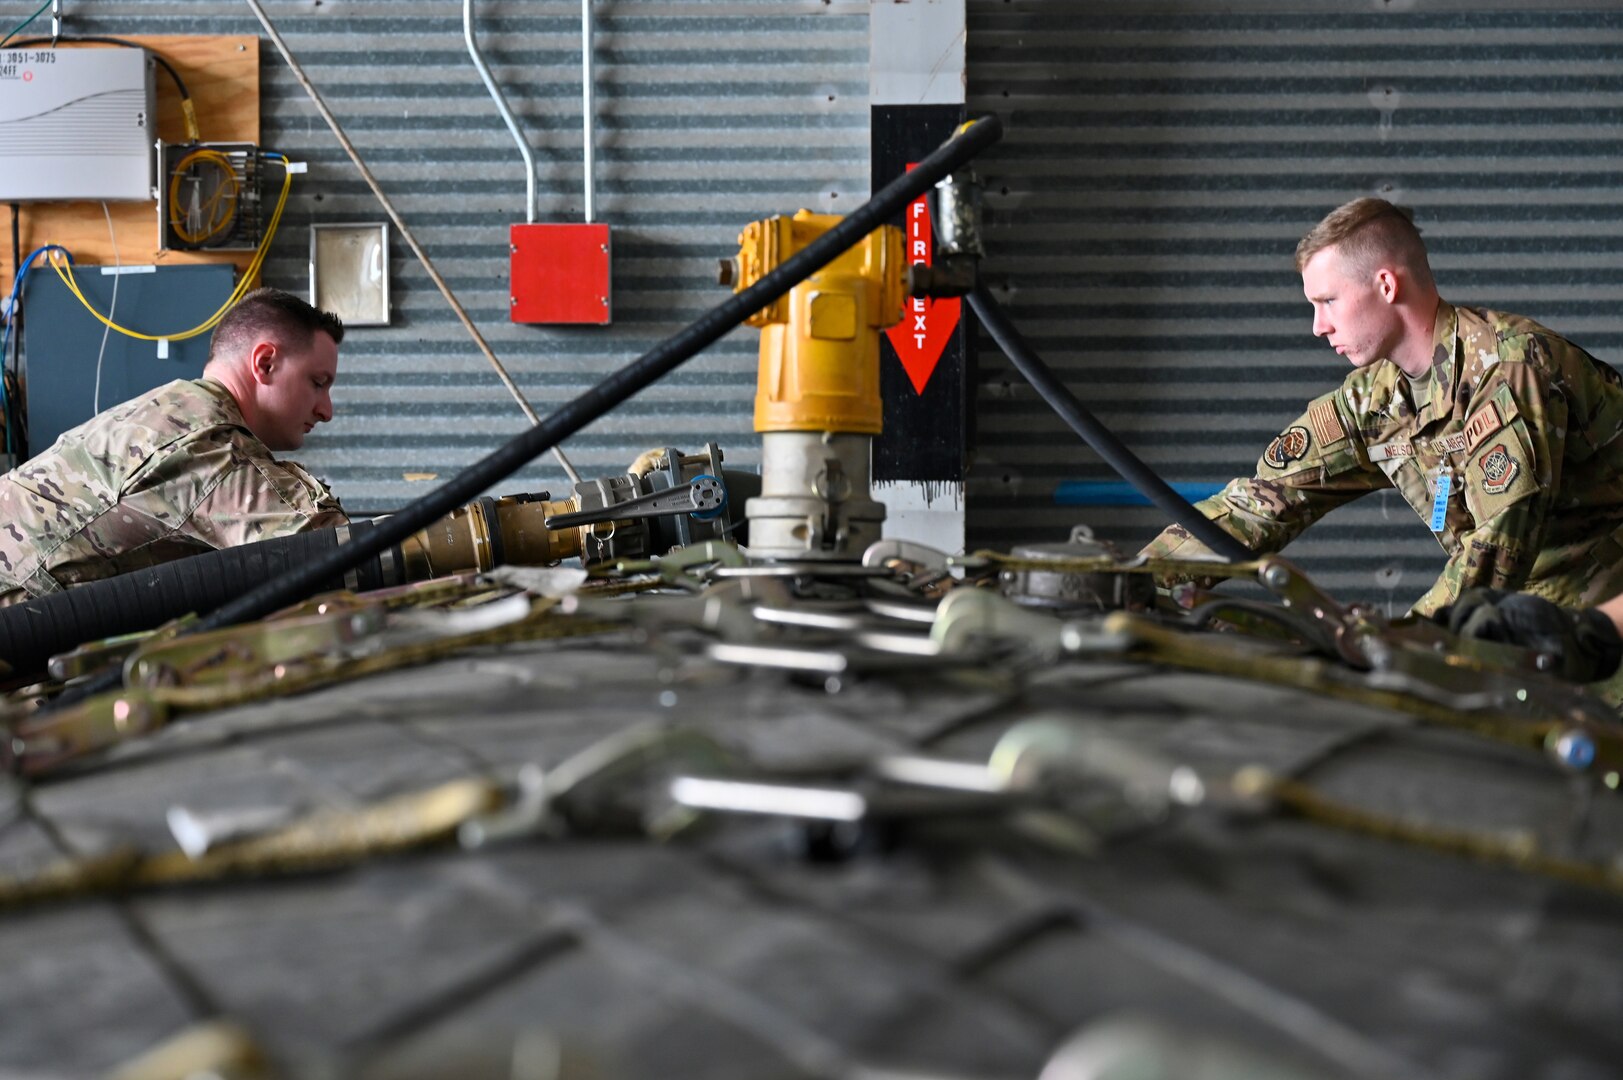 U.S. Air Force Staff Sgt. Garrett Huntoon, 374th Logistic Readiness Squadron fuels service center controller, left, and Airman 1st Class Griffin Nelson, 436th Logistics Readiness Squadron fuels operator, strap down an Aerial Bulk Fuel Delivery System at Alpena Combat Readiness Training Center, Michigan, May 19, 2021. The ABFDS, a portable 3,000-gallon fuel bladder, can be loaded on a C-130J Super Hercules, C-5 Galaxy, or C-17 Globemaster III and transported anywhere around the world. (U.S. Air Force photo by Senior Airman Aaron Irvin)